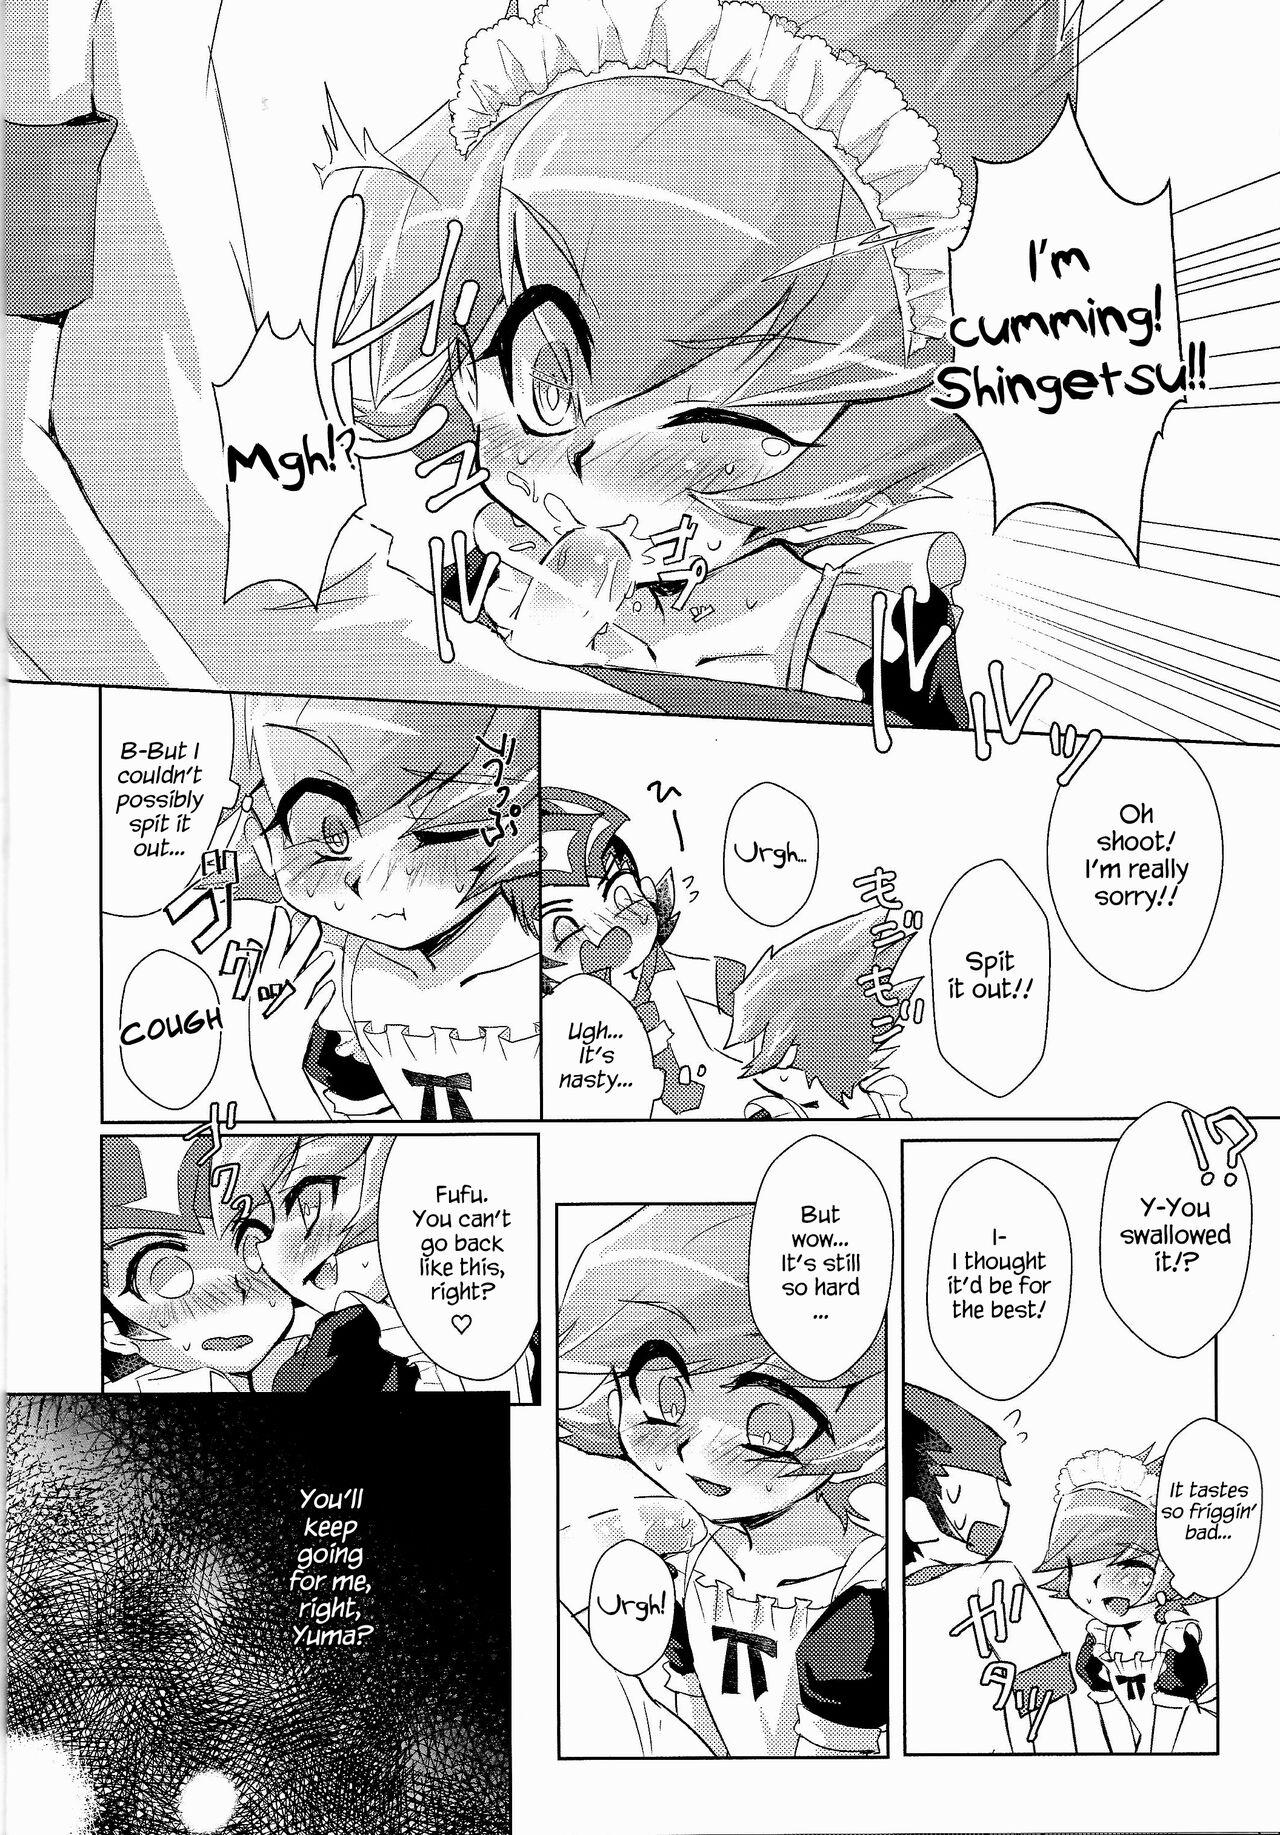 Sexy Whores Stand by me - Yu gi oh zexal Fudendo - Page 11